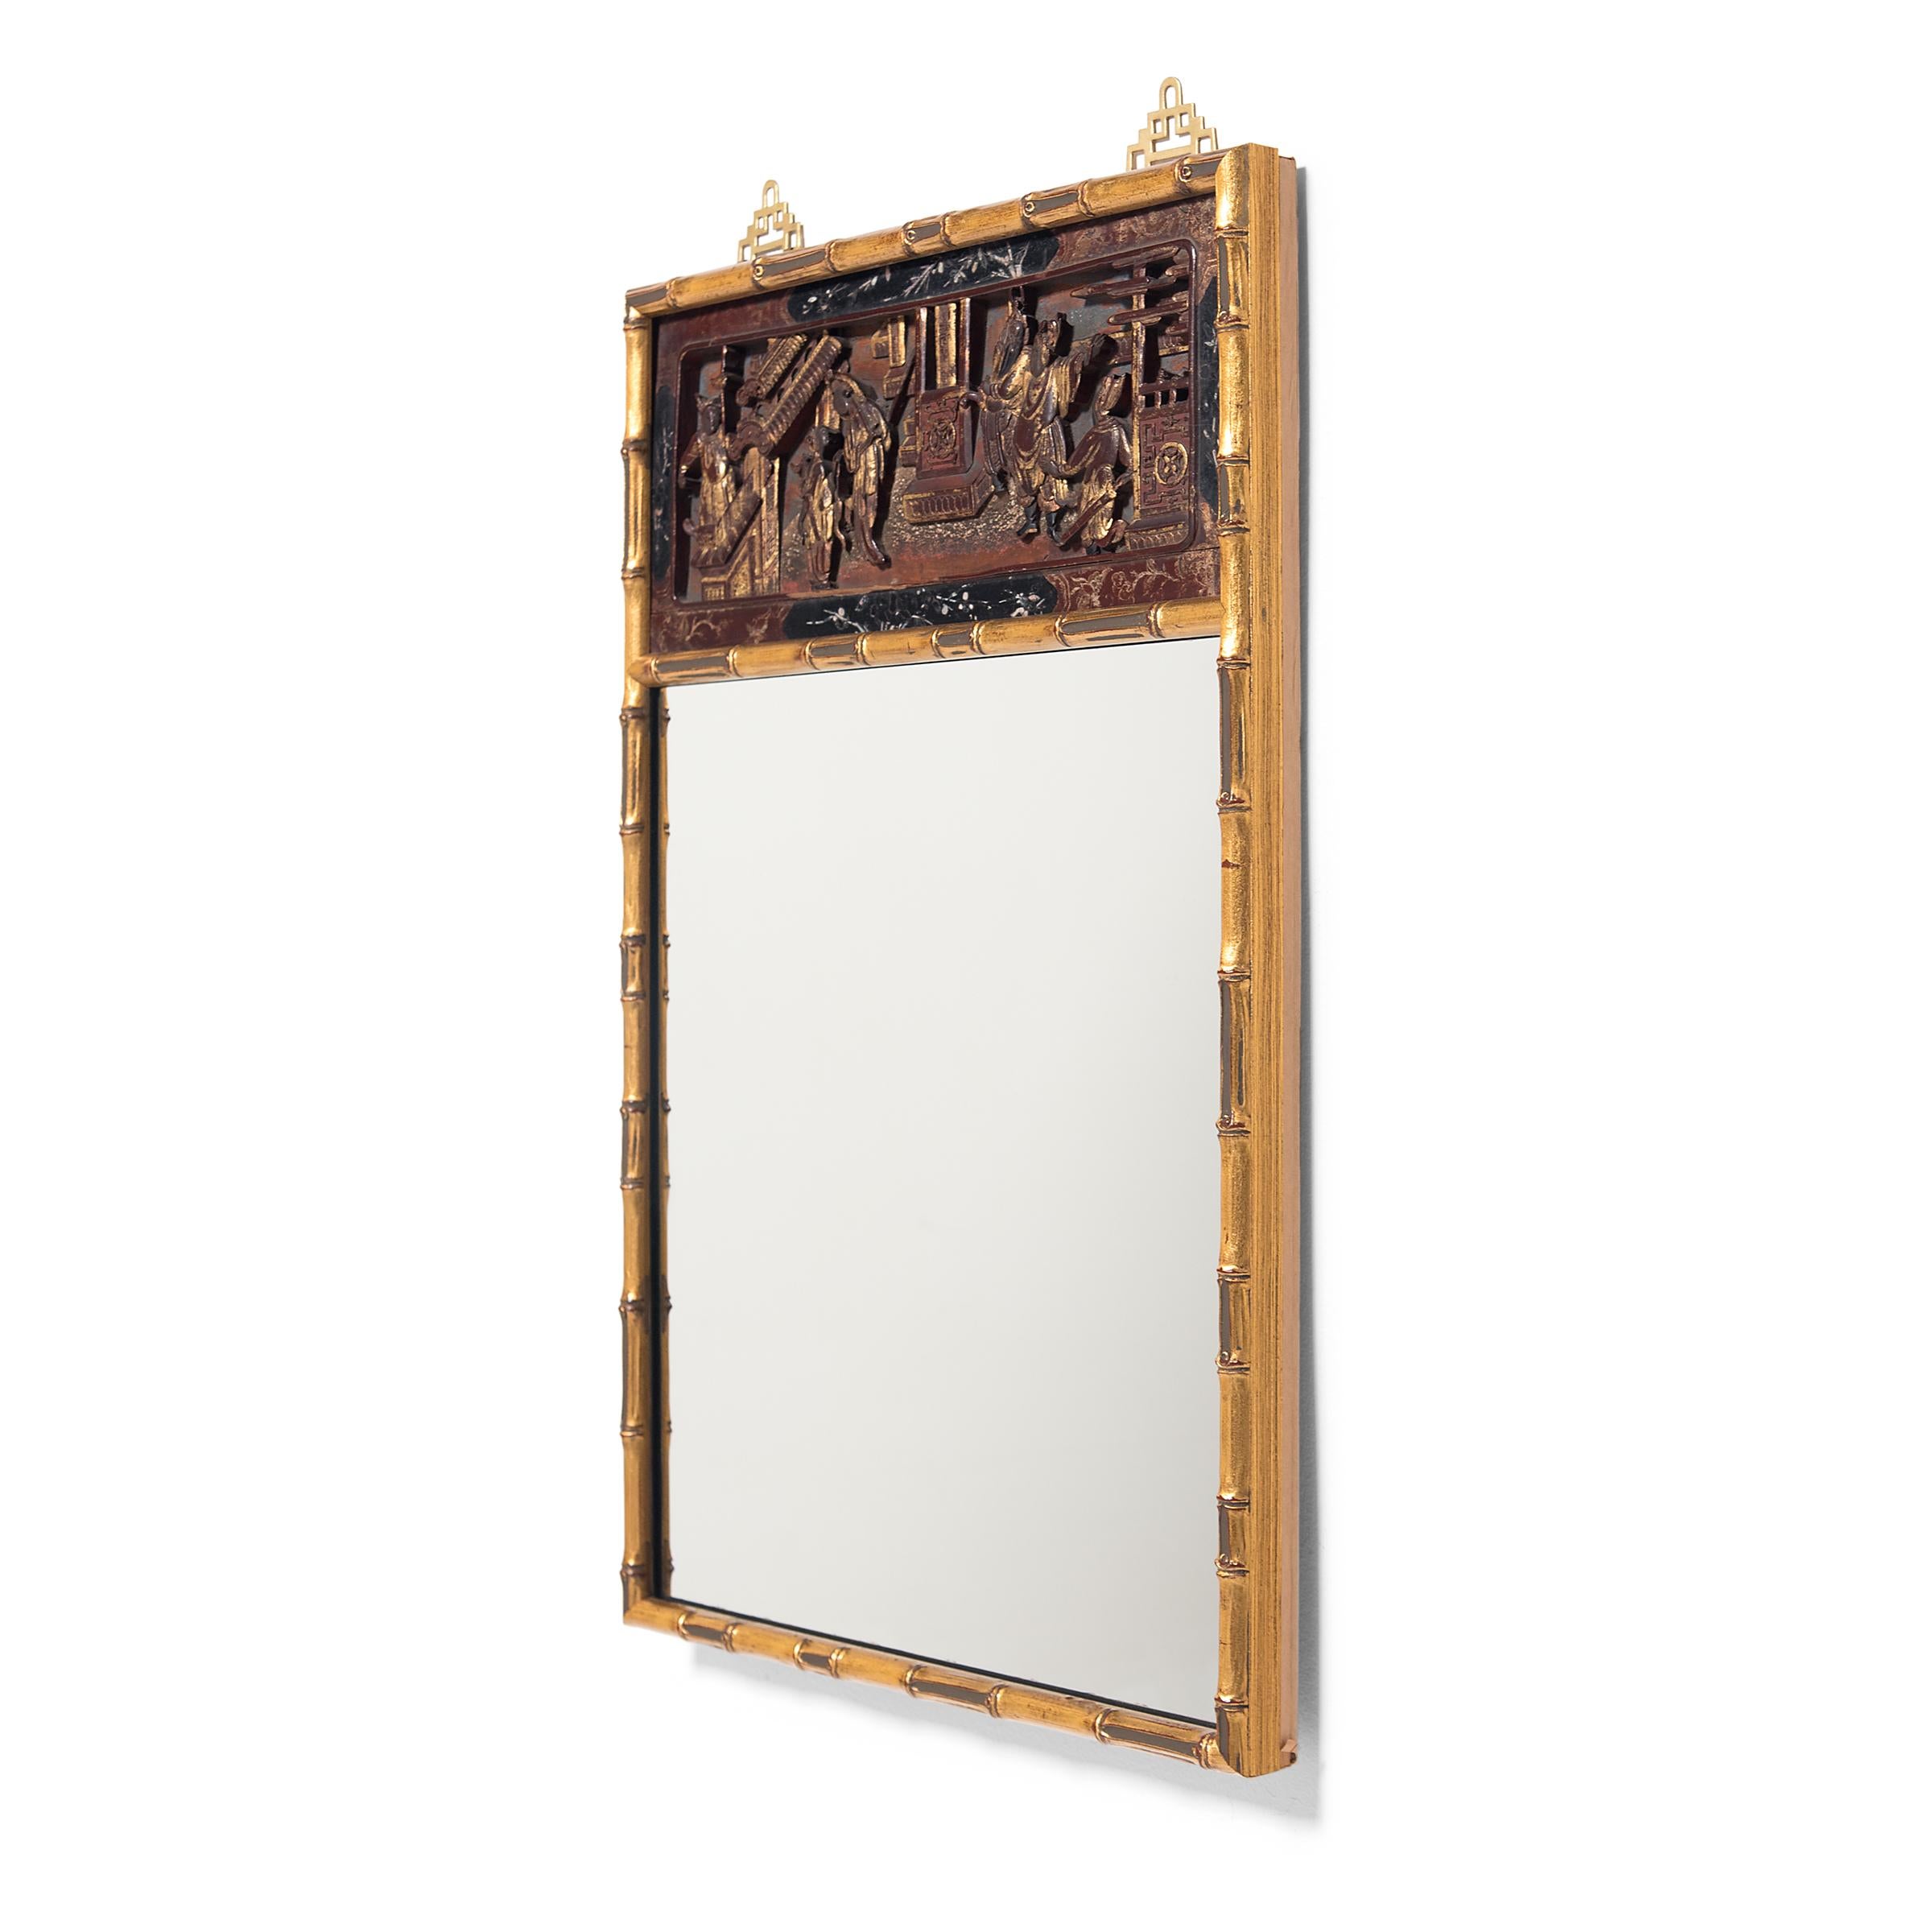 This rectangular wall mirror features an antique Chinese bed panel and a contemporary gilt frame carved to resemble lengths of segmented bamboo. Likely extracted from an antique canopy bed or cabinet, the 19th-century panel is carved in low relief